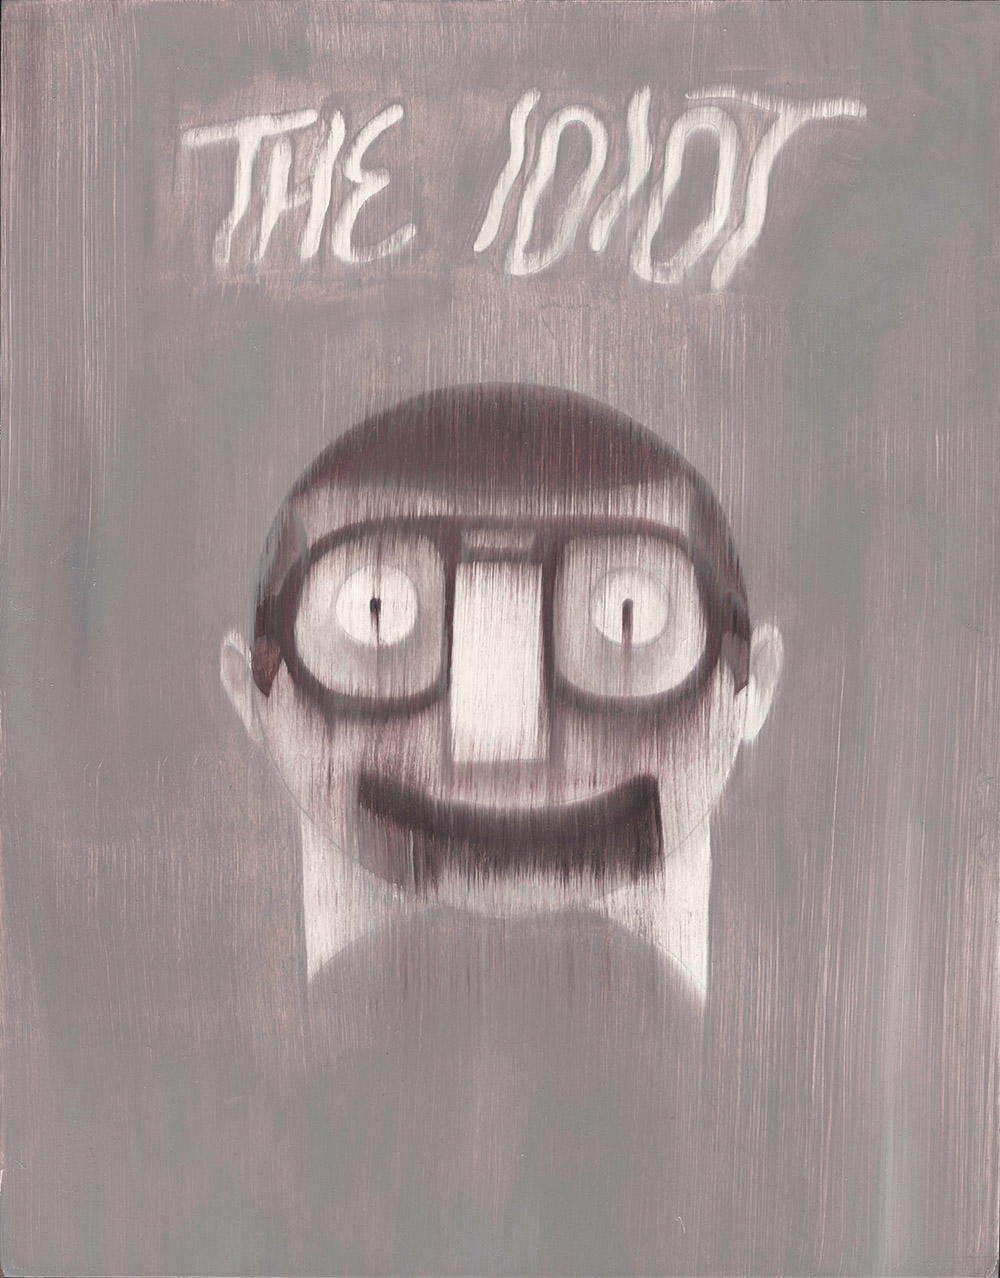 The Idiot - cover painting